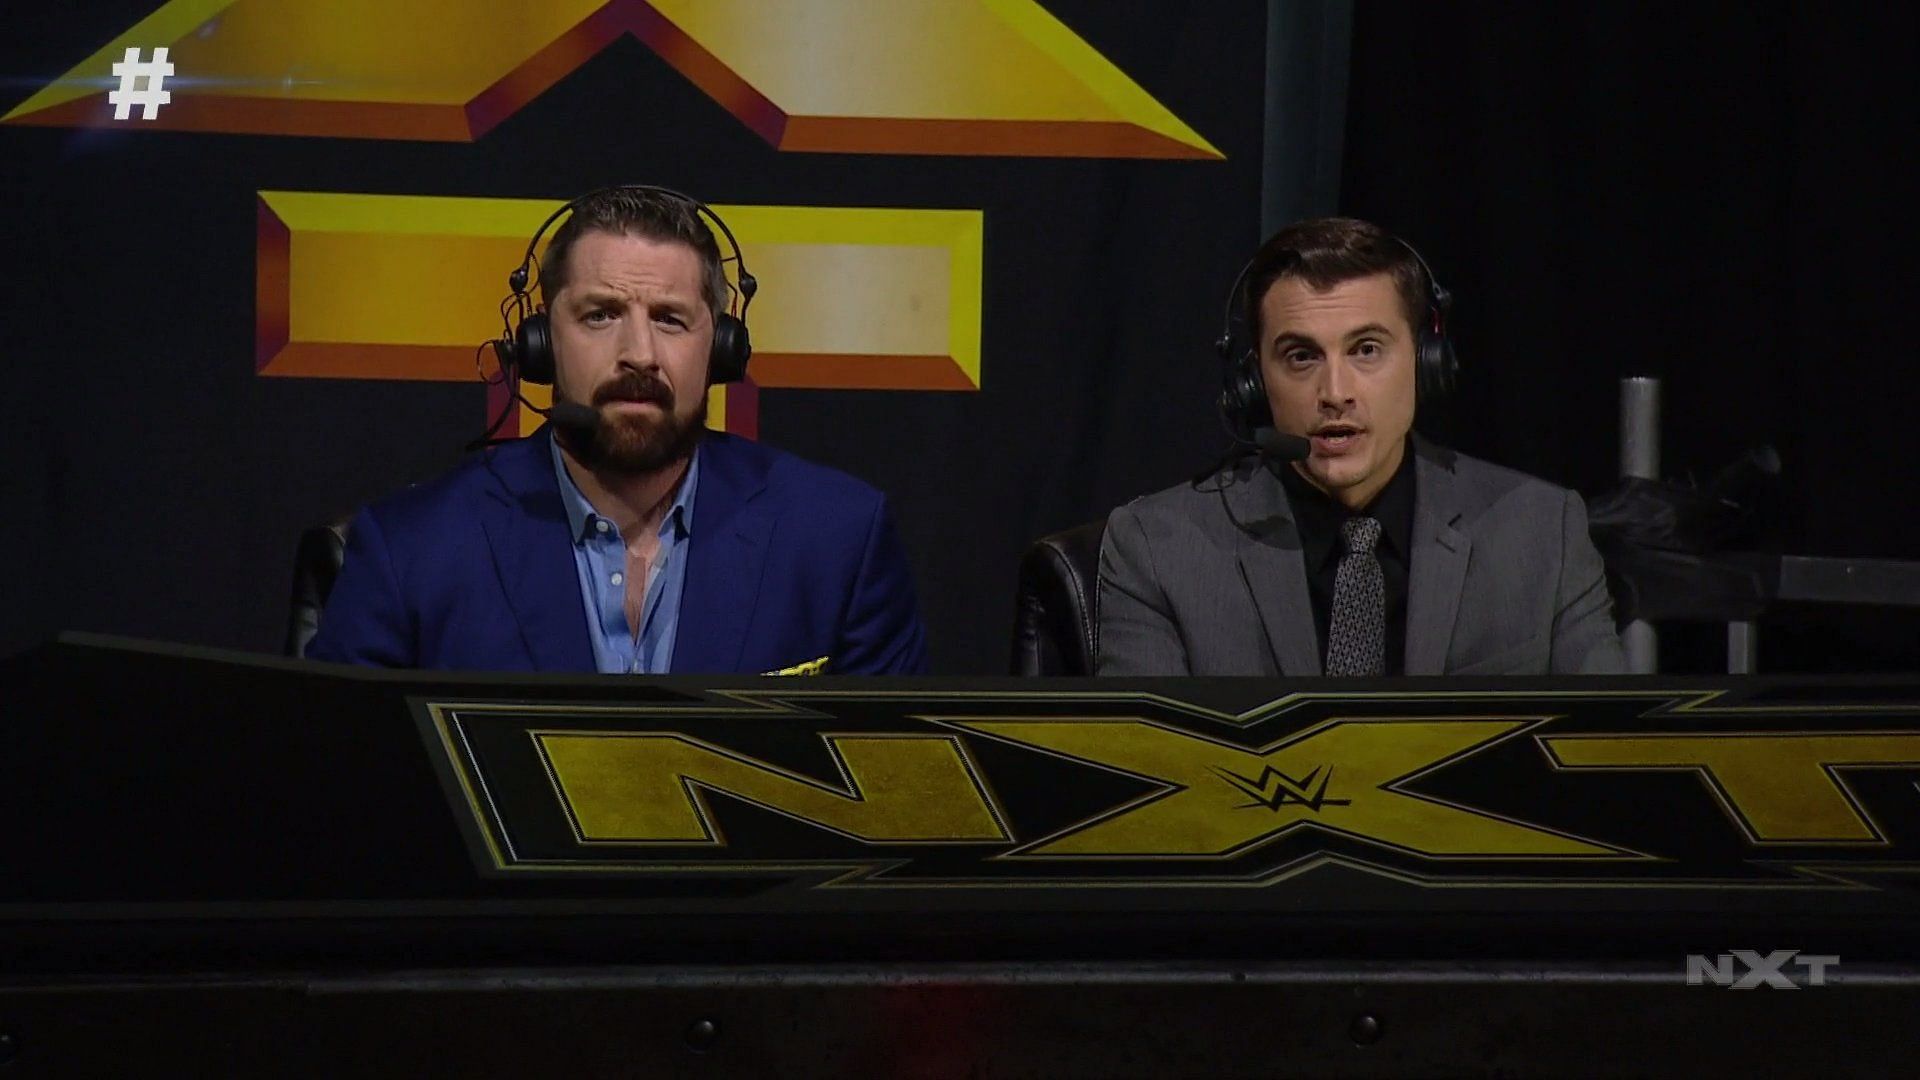 Wade Barrett returned to WWE to do commentary for the NXT brand in August of 2020